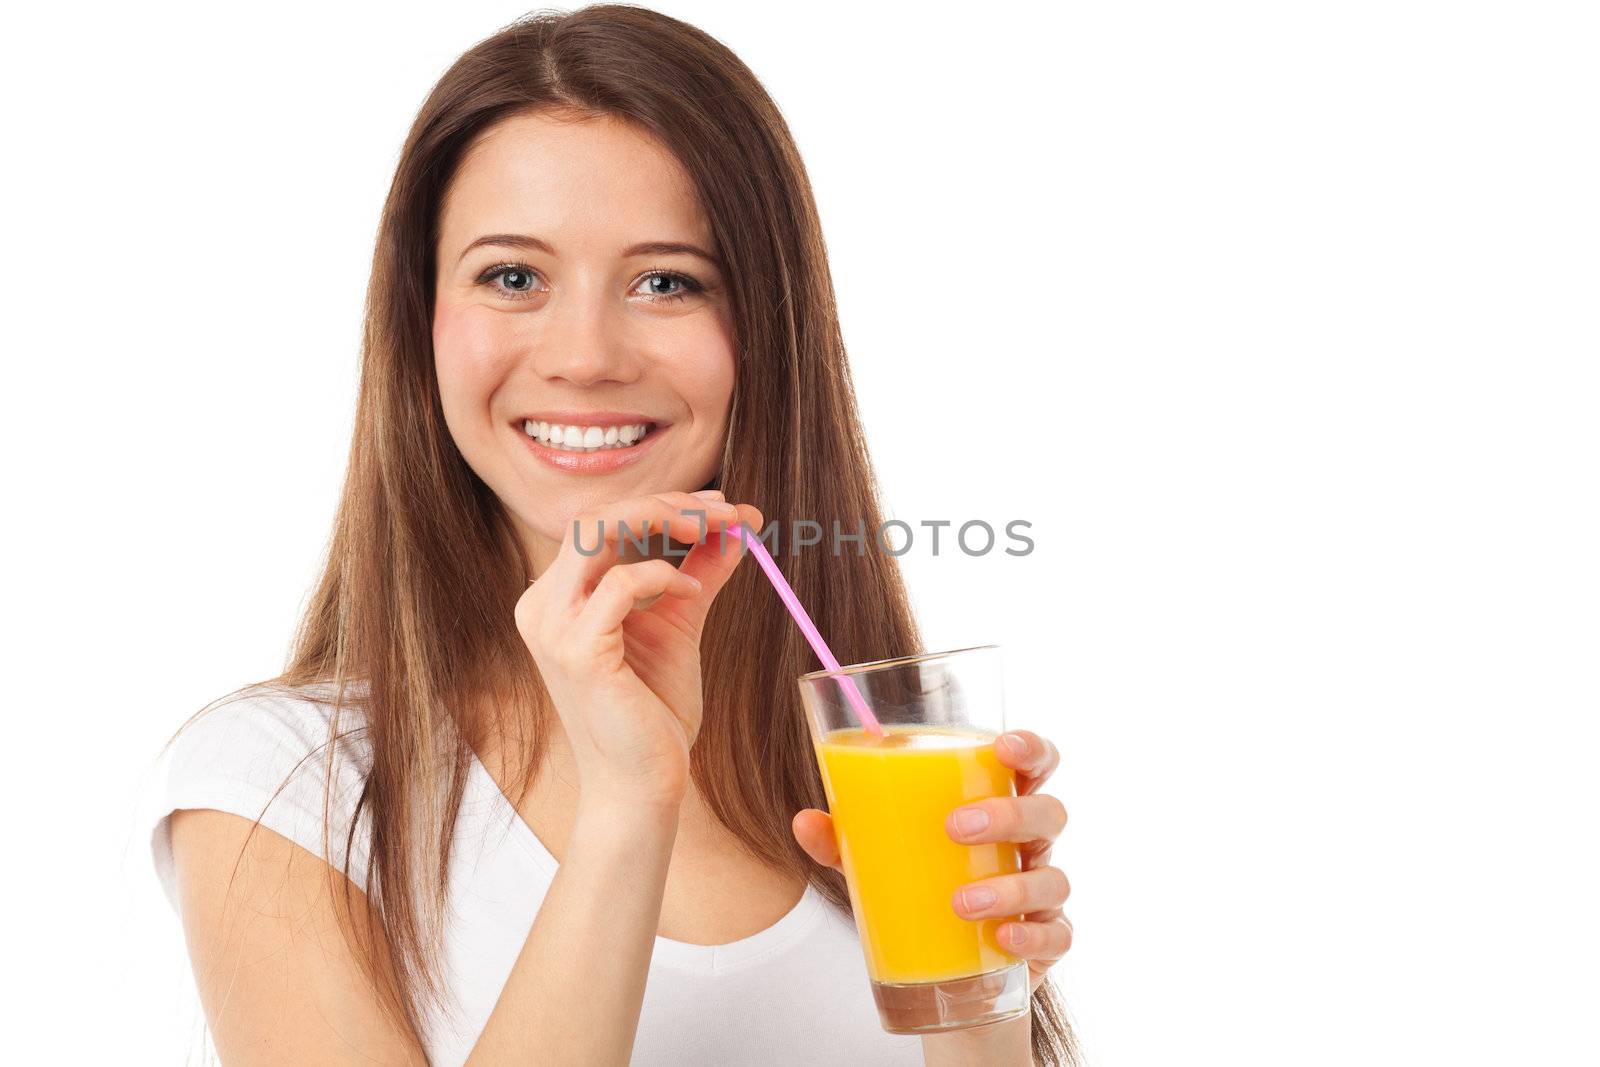 Portrait of a woman with a glass of orange juice, isolated on white